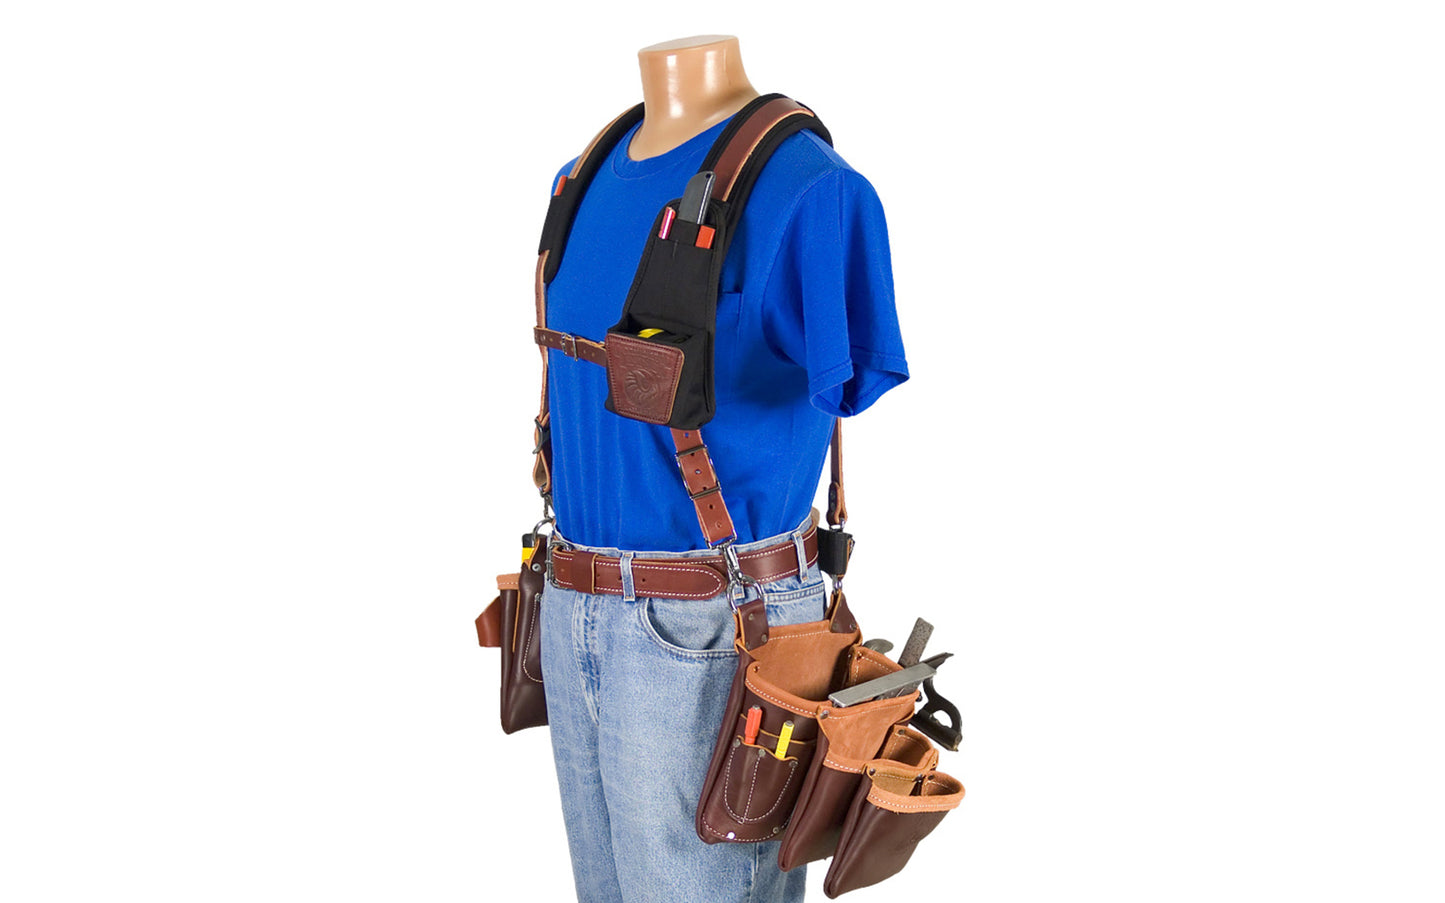 Occidental Leather "Stronghold" Beltless 6-Bag Framer is a Beltless system for your tool bags & accessories. Combines unrivaled comfort, stability, & load distribution. Made of industrial nylon material & genuine leather. Easy On & Off beltless tool bag system. One size fits most. Model No. 5093. 759244158601